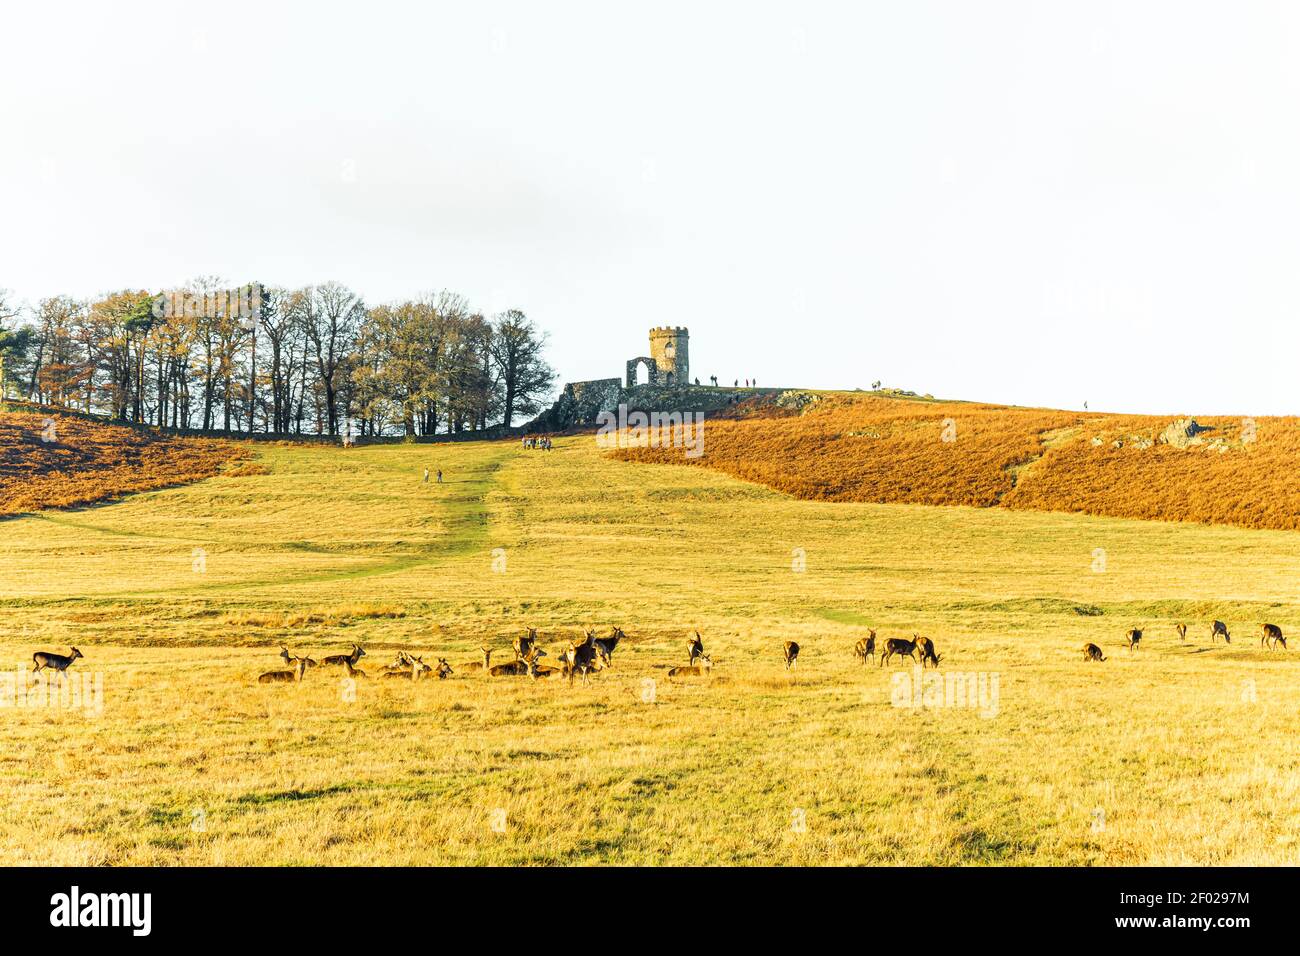 Shows red deer, a forest, Old John Tower, people walking across the hill. Landscape area with a hill. Mars-like brown, orange and green colours. Stock Photo